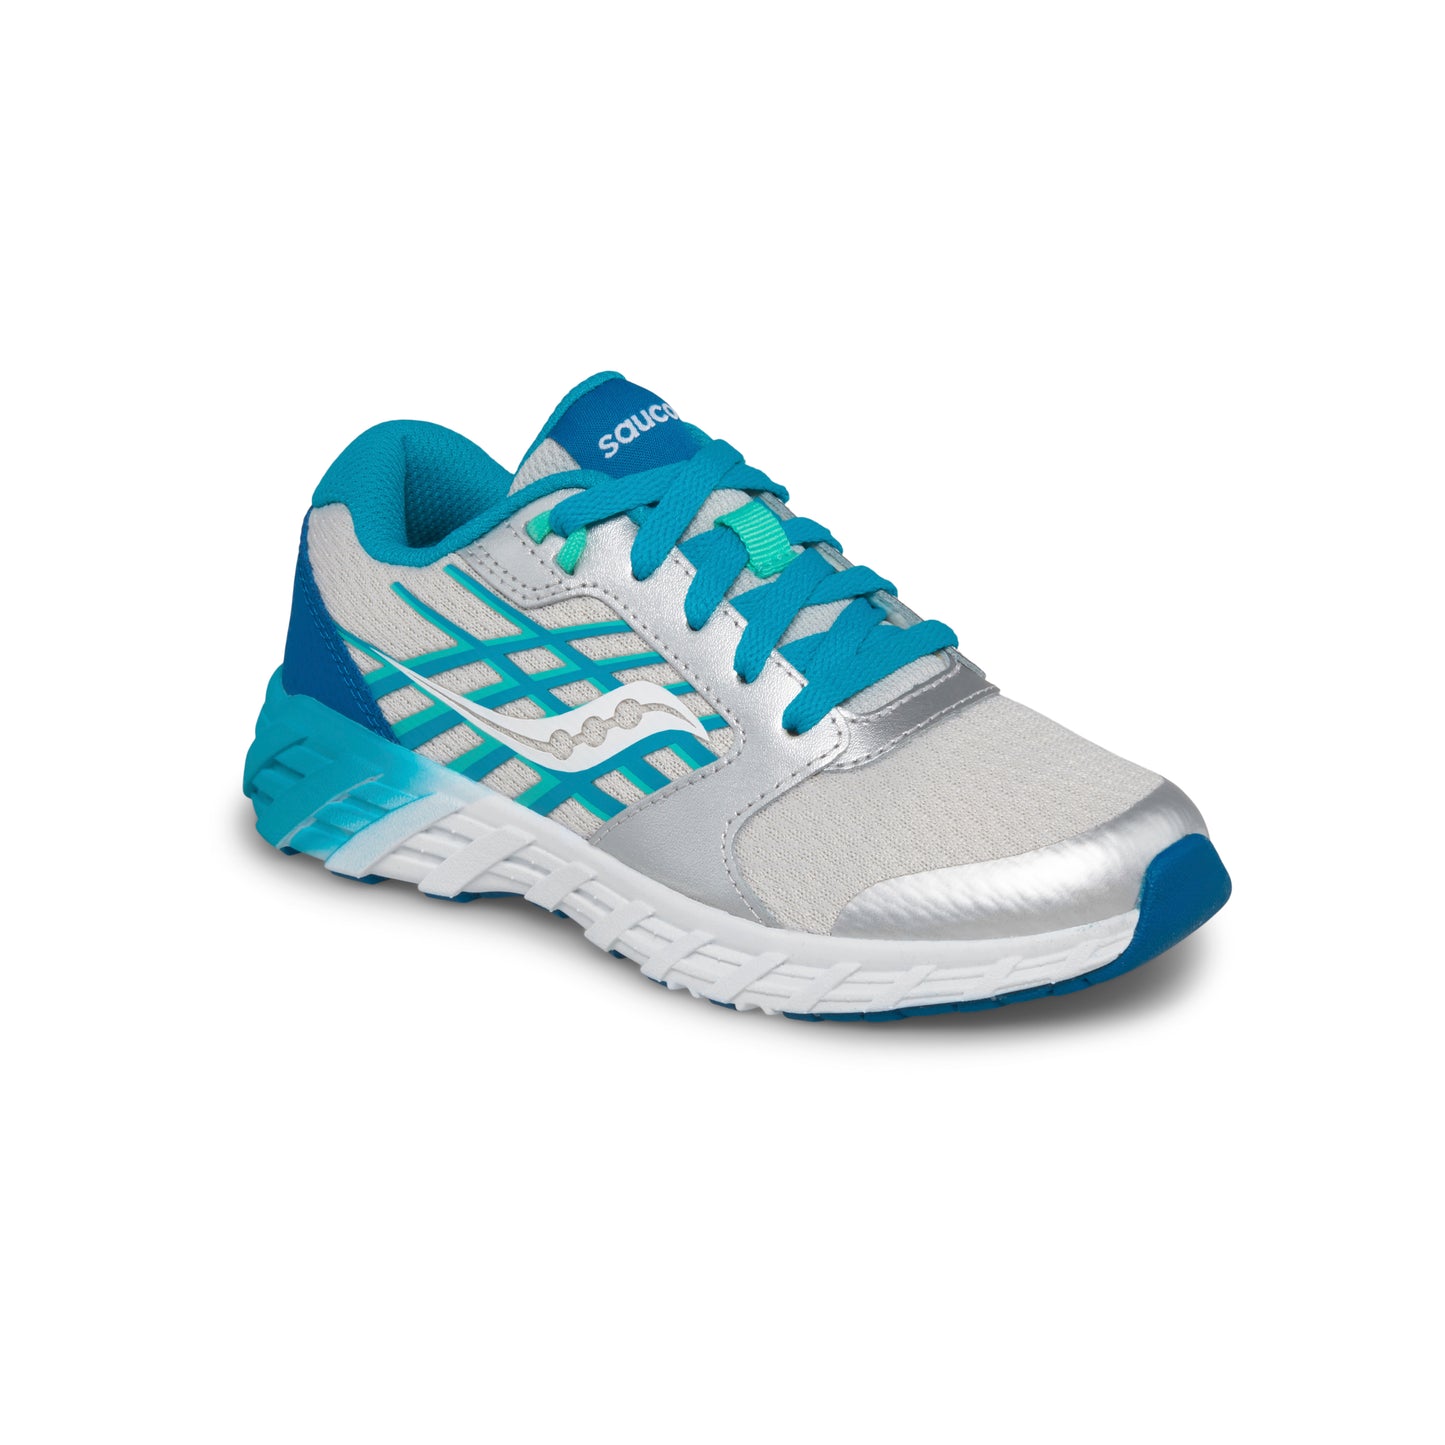 wind-20-sneaker-bigkid-turquoise-silver__Turquoise/Silver_1